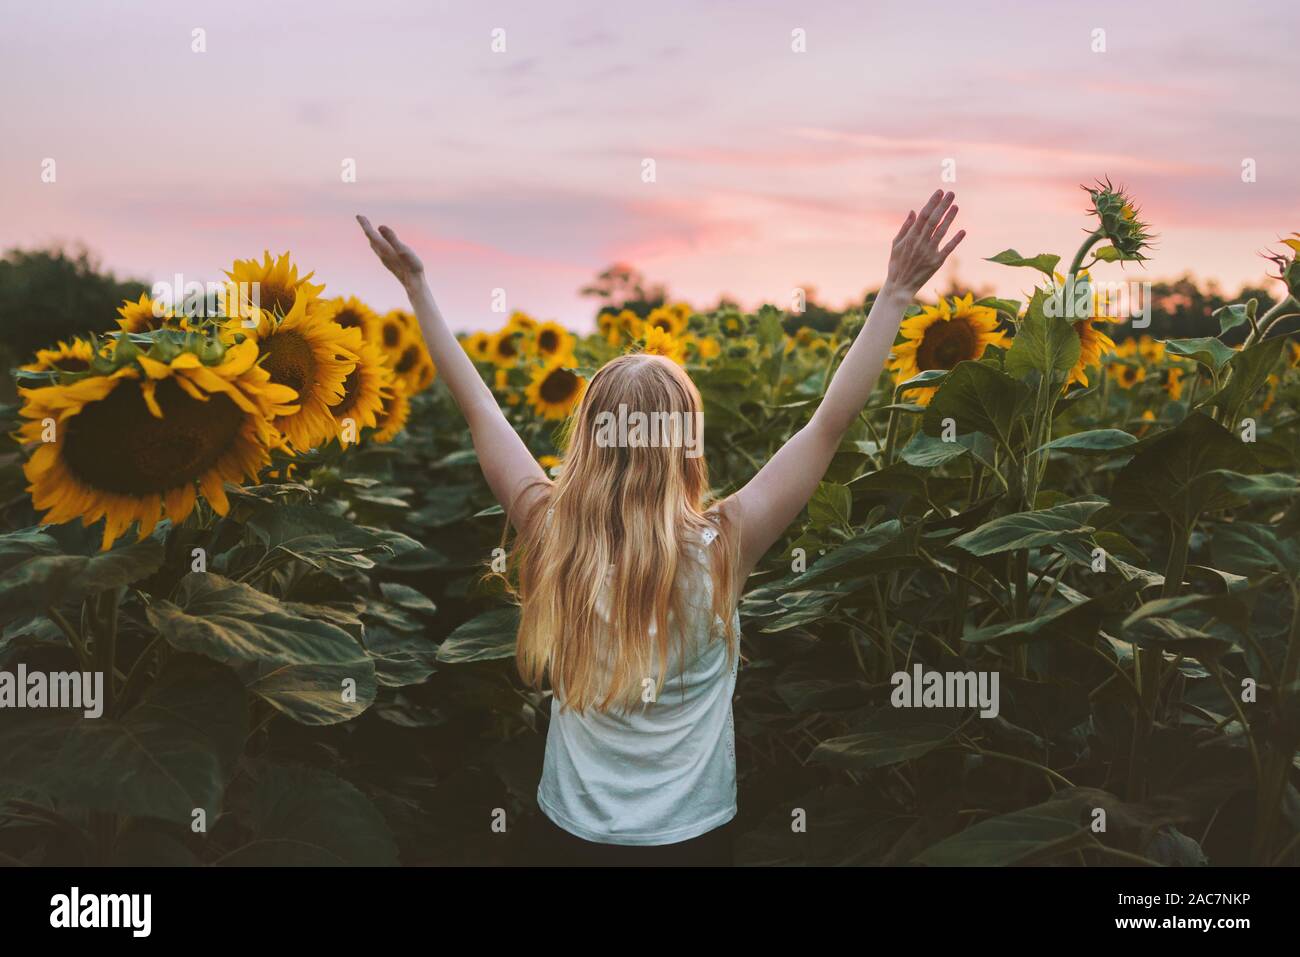 Woman happy raised hands in sunflowers field harmony with nature travel healthy lifestyle outdoor vacations alone Stock Photo